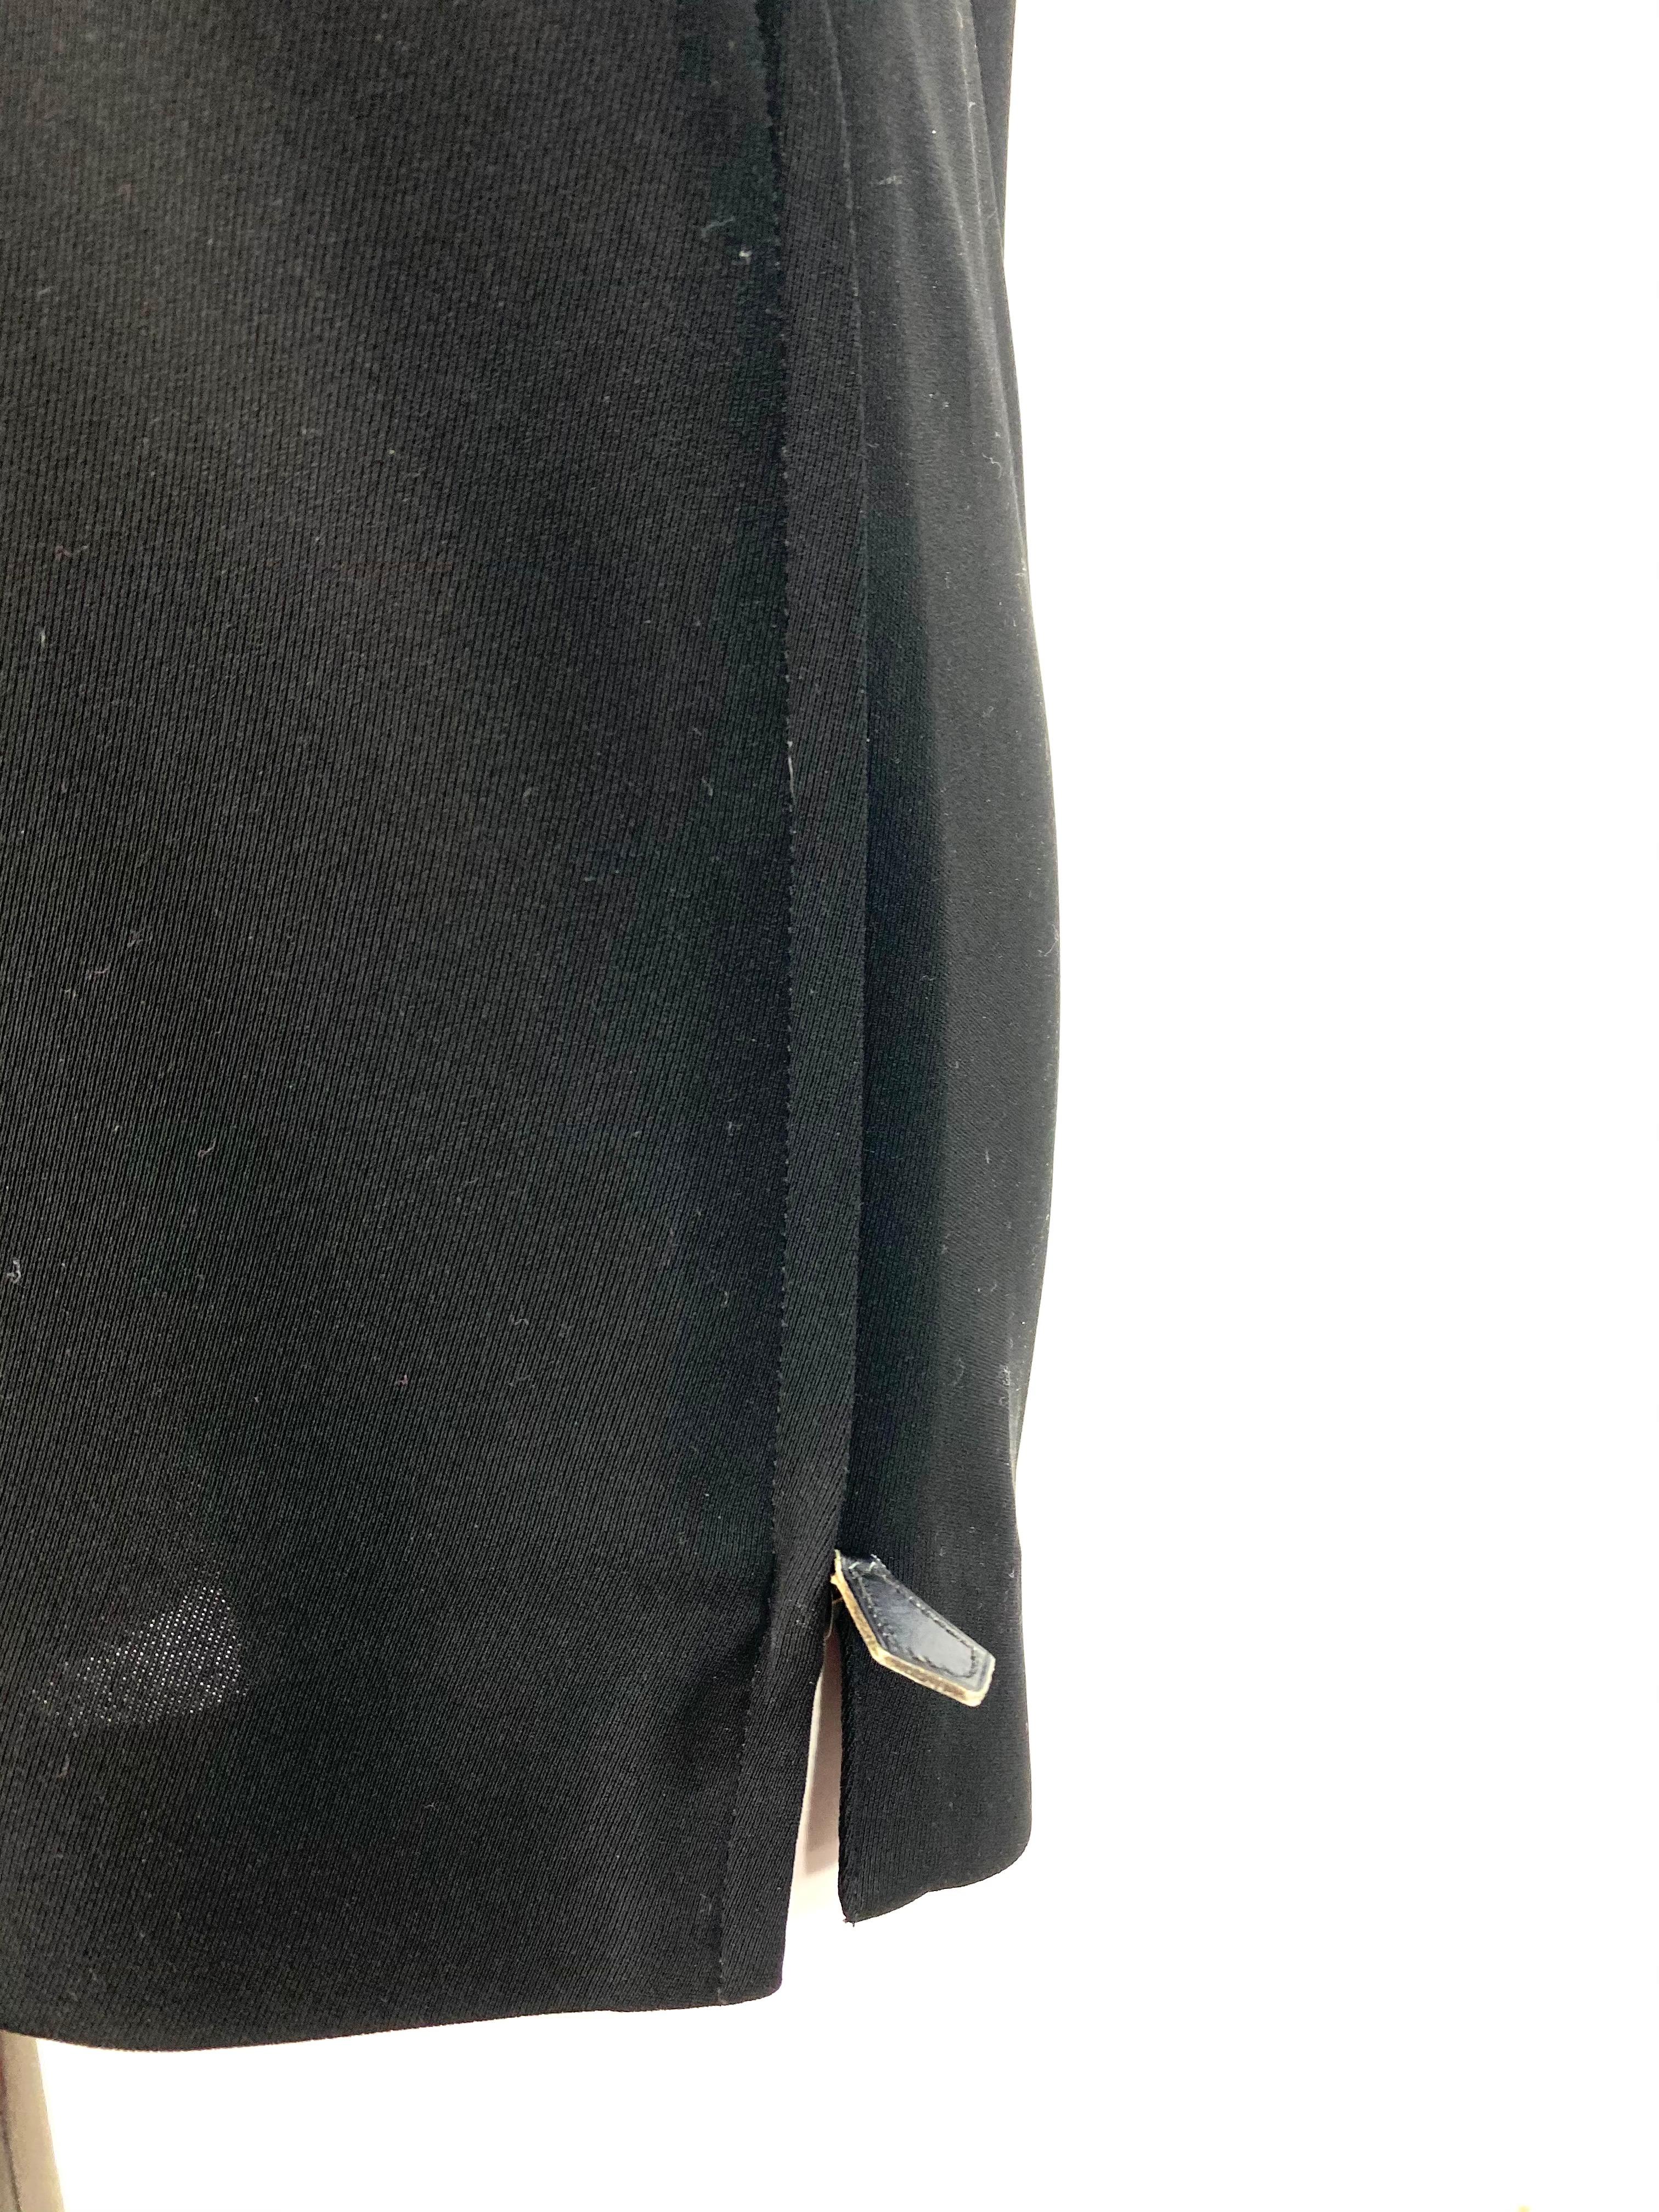 Product details:

Black polyester with silk lining dress designed by Hermes, featuring  zipper detail on both sides, 3/4 sleeve length and crew neck line.
Made in France.